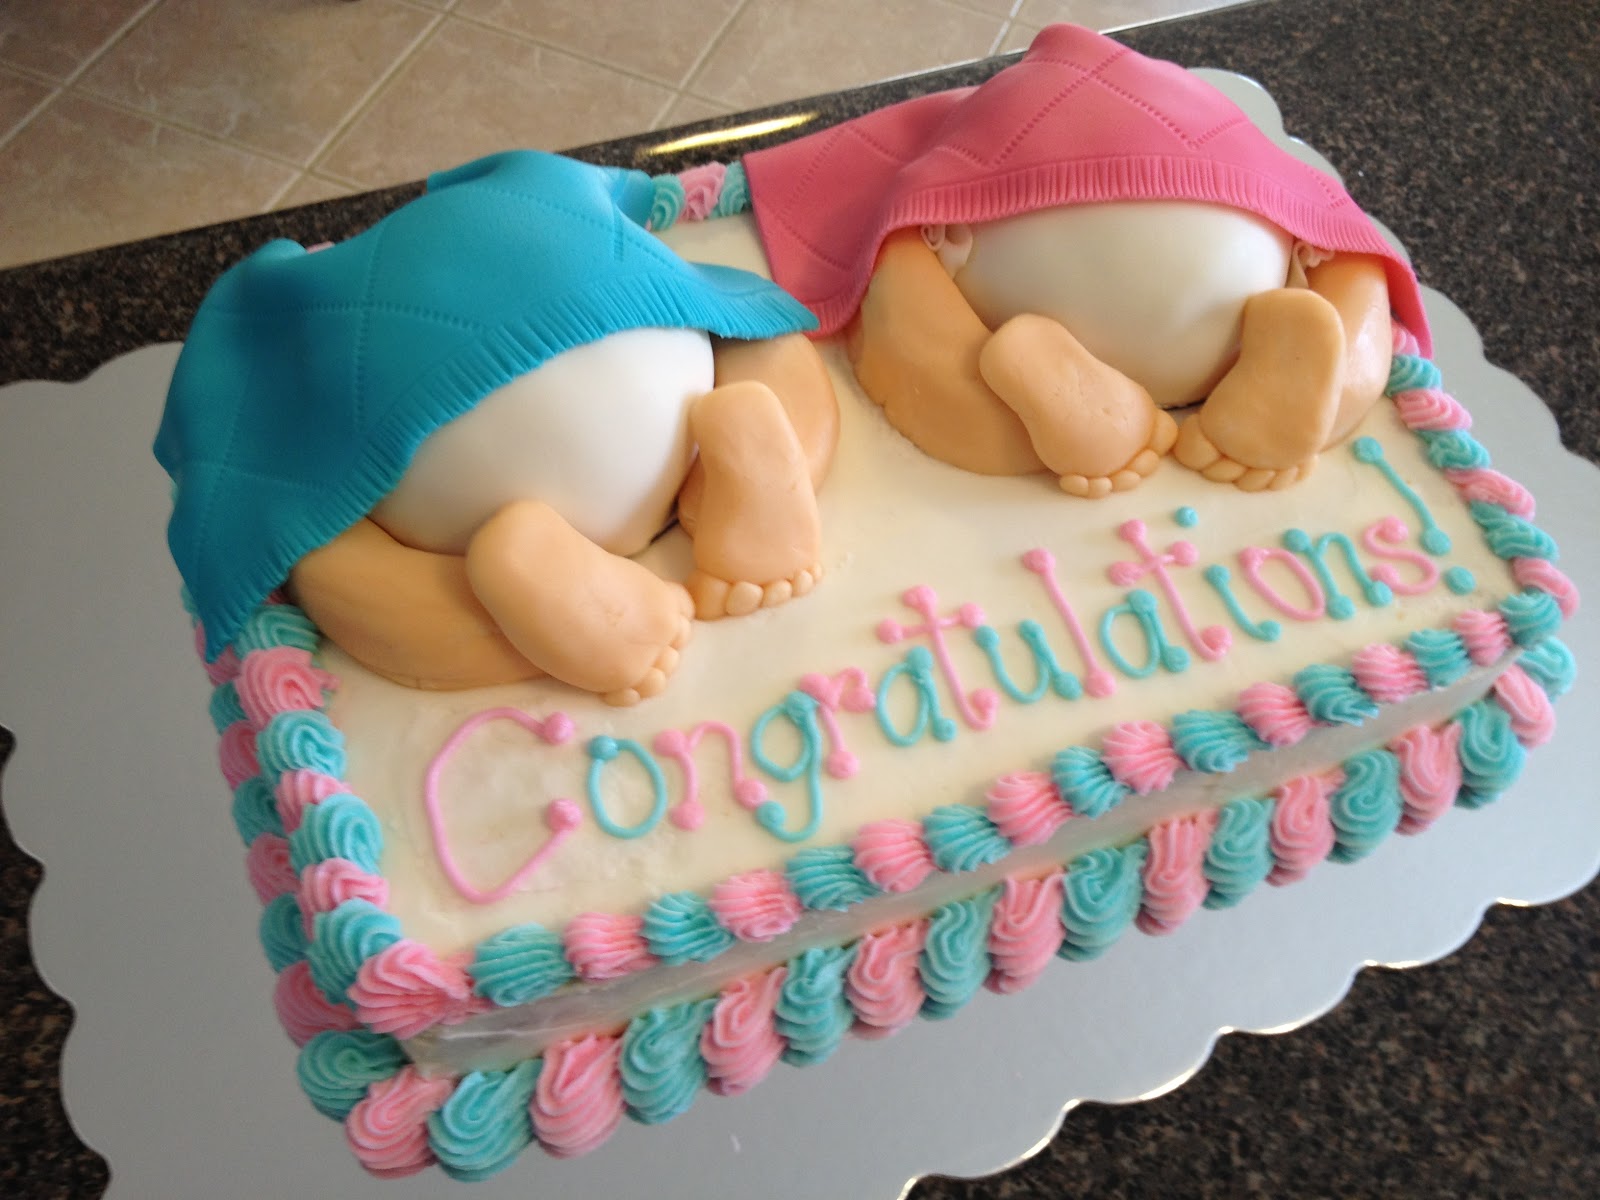 50 Gorgeous Baby Shower Cakes Stay At Home Mum